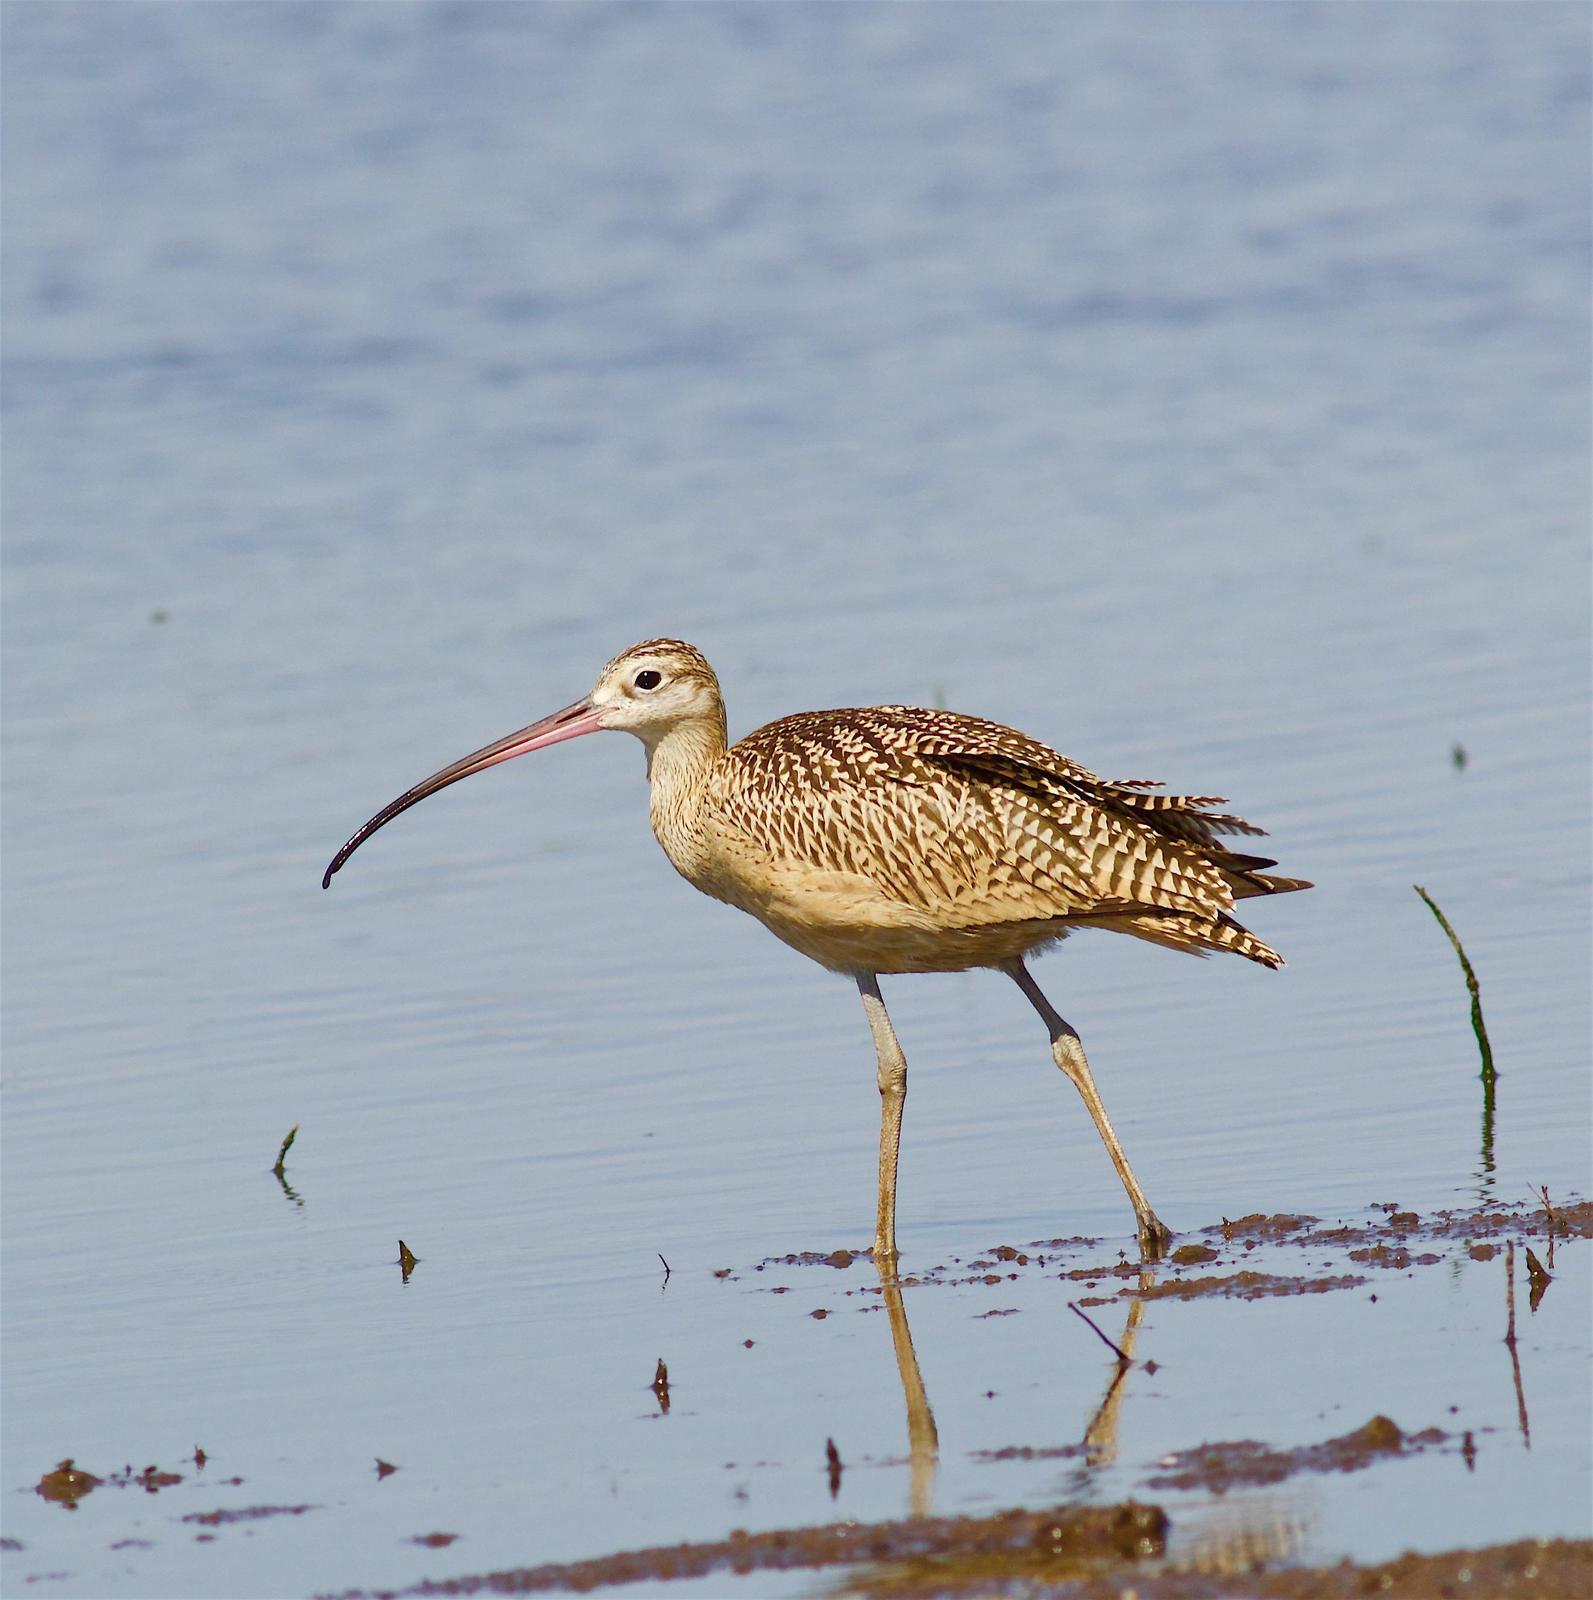 Long-billed Curlew Photo by Kathryn Keith